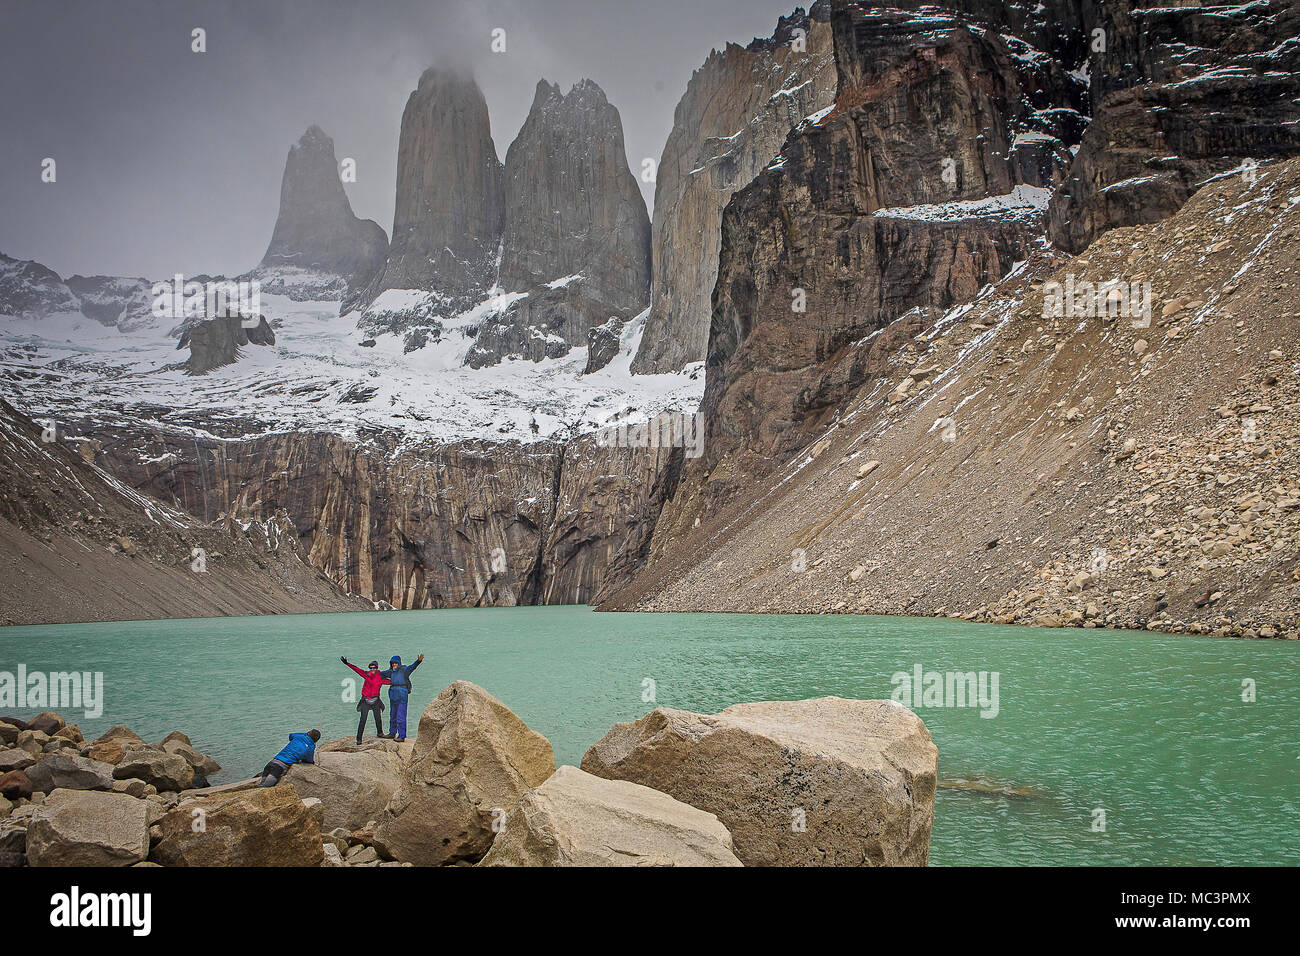 Hikers, Mirador Base Las Torres. You can see the amazing Torres del Paine, Torres del Paine national park, Patagonia, Chile Stock Photo